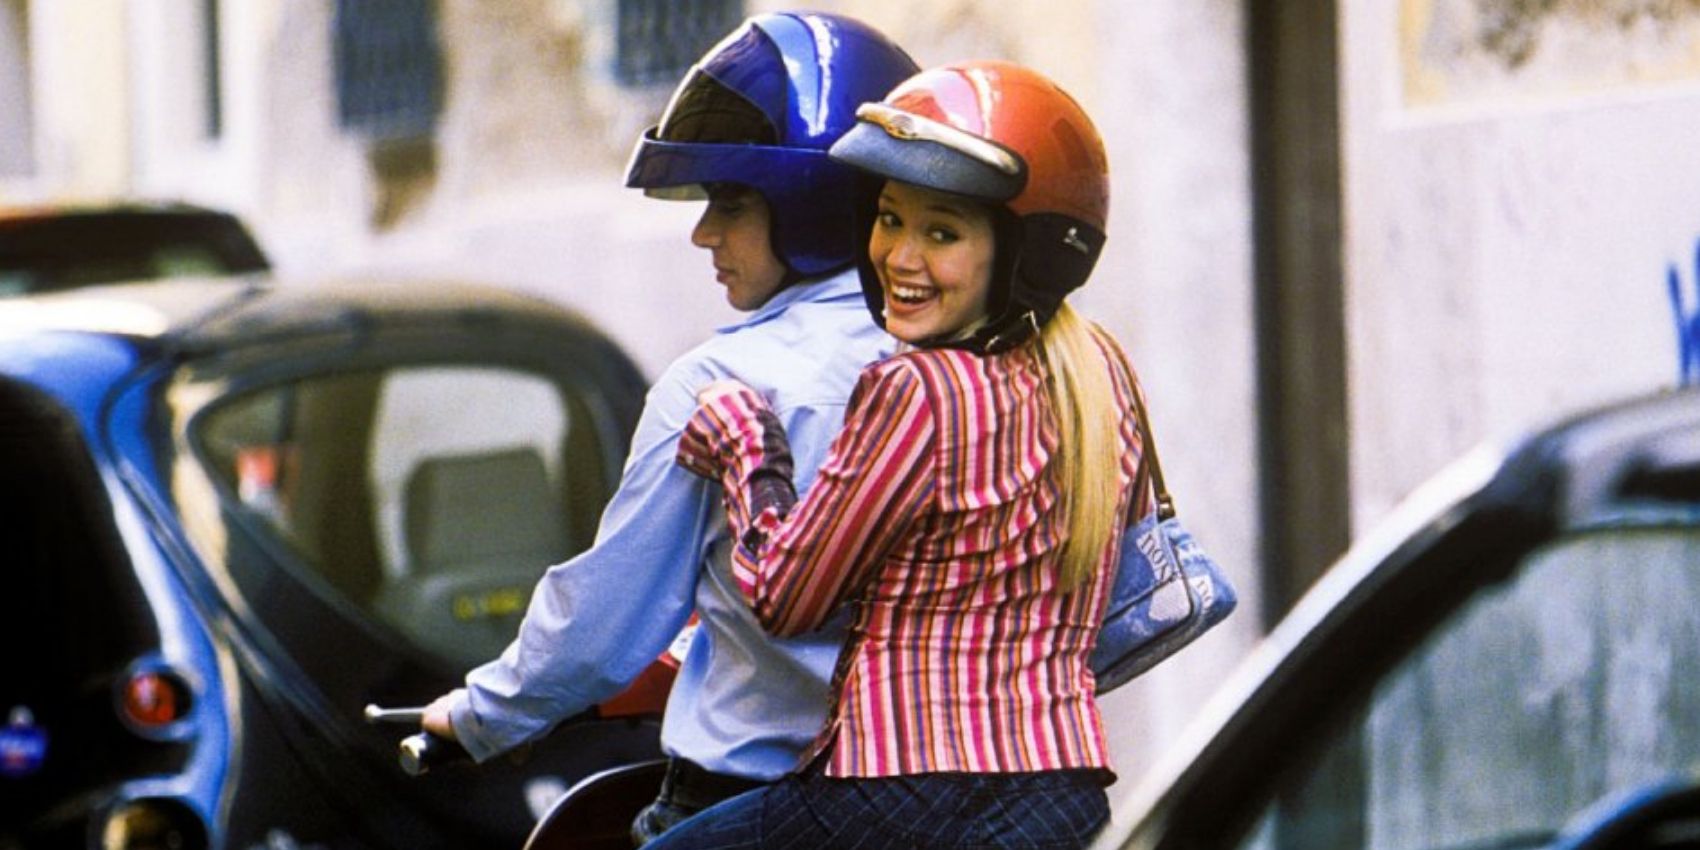 Paolo And Lizzie In The Lizzie McGuire Movie